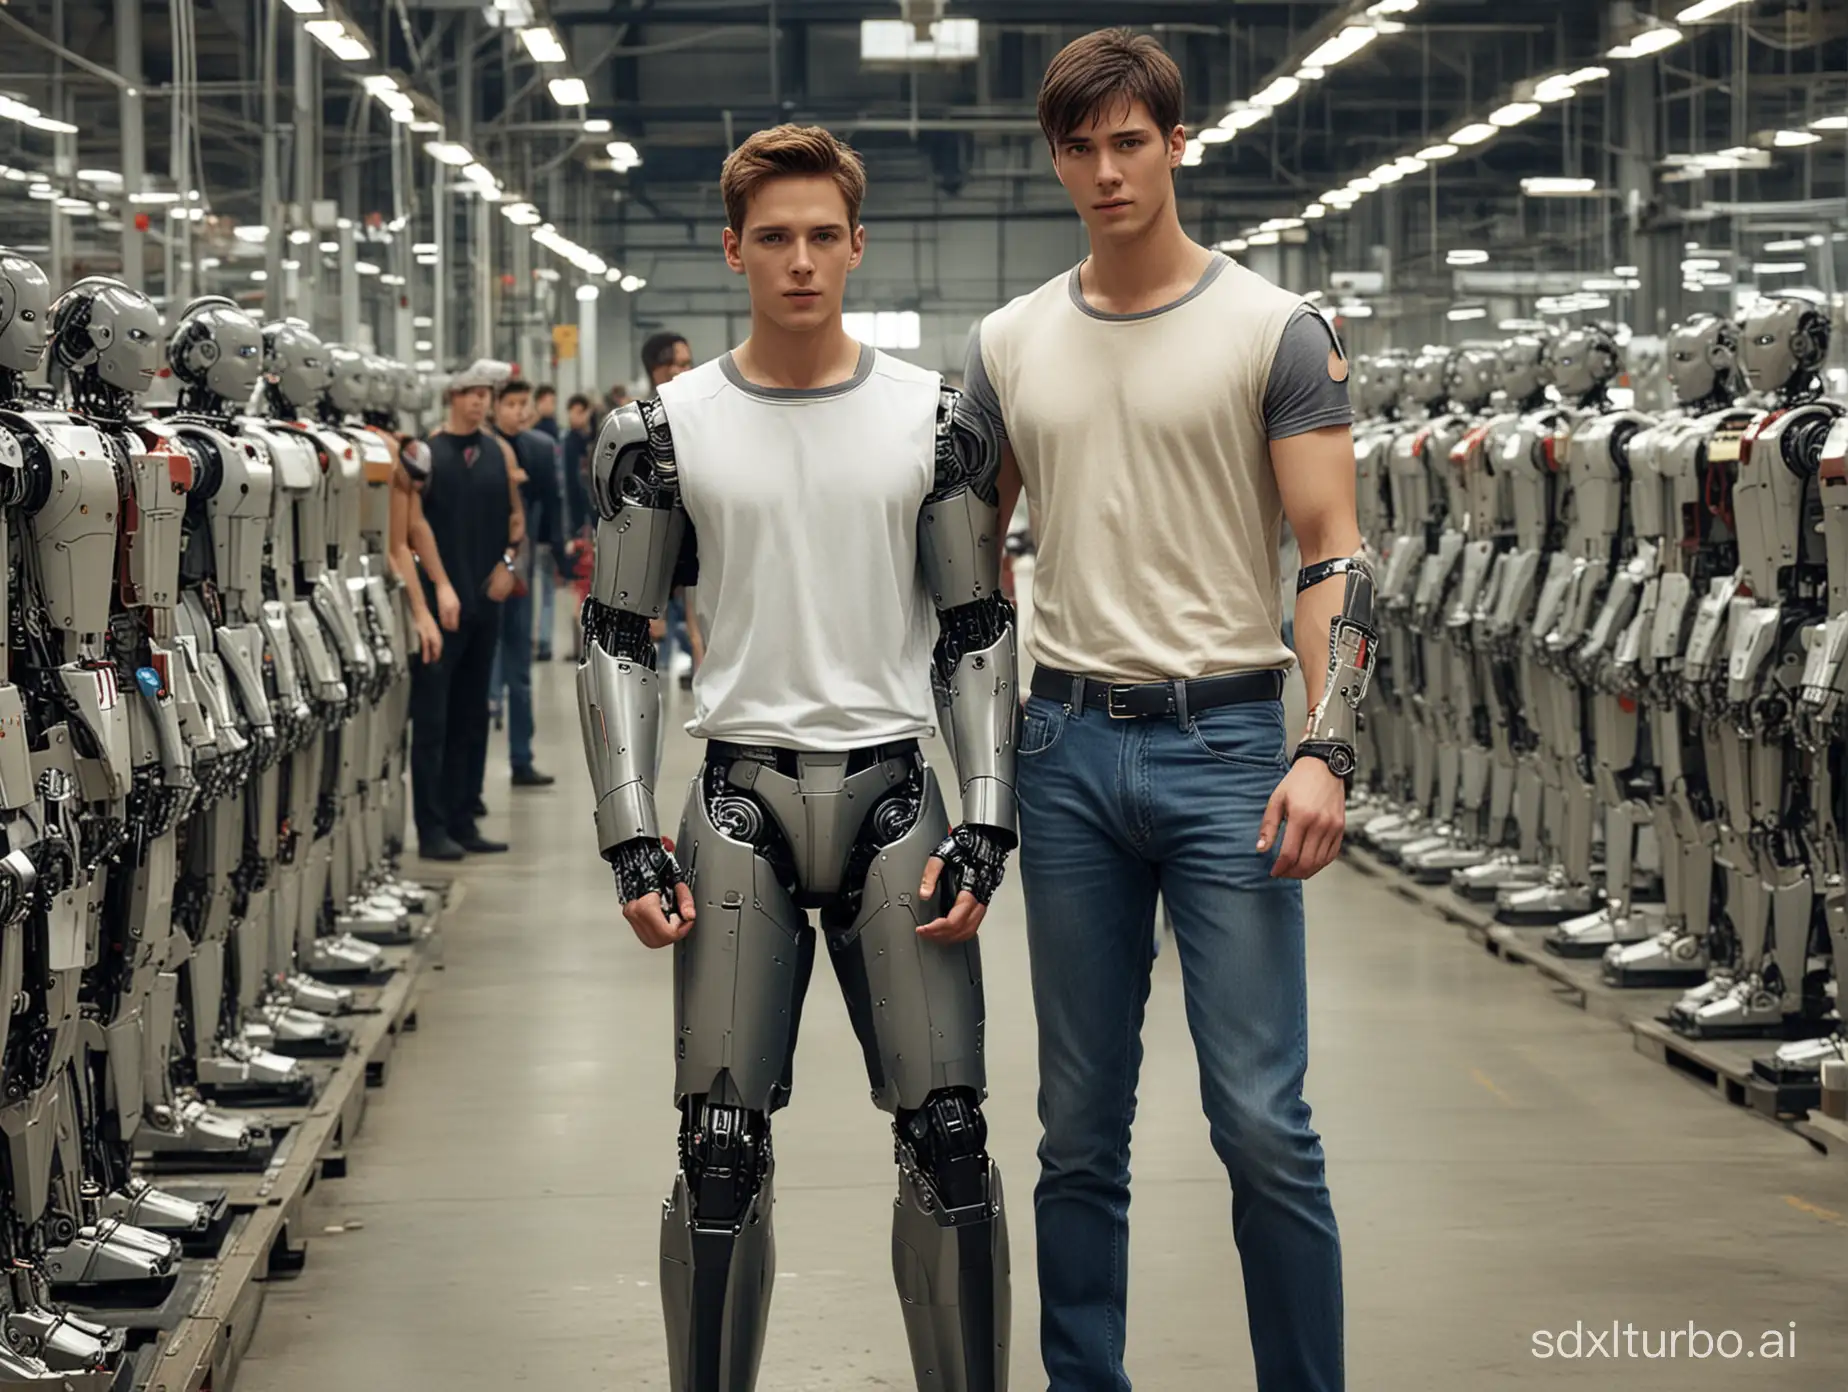 A factory that produces handsome robot guys, the robot boyfriend has a price tag on him.